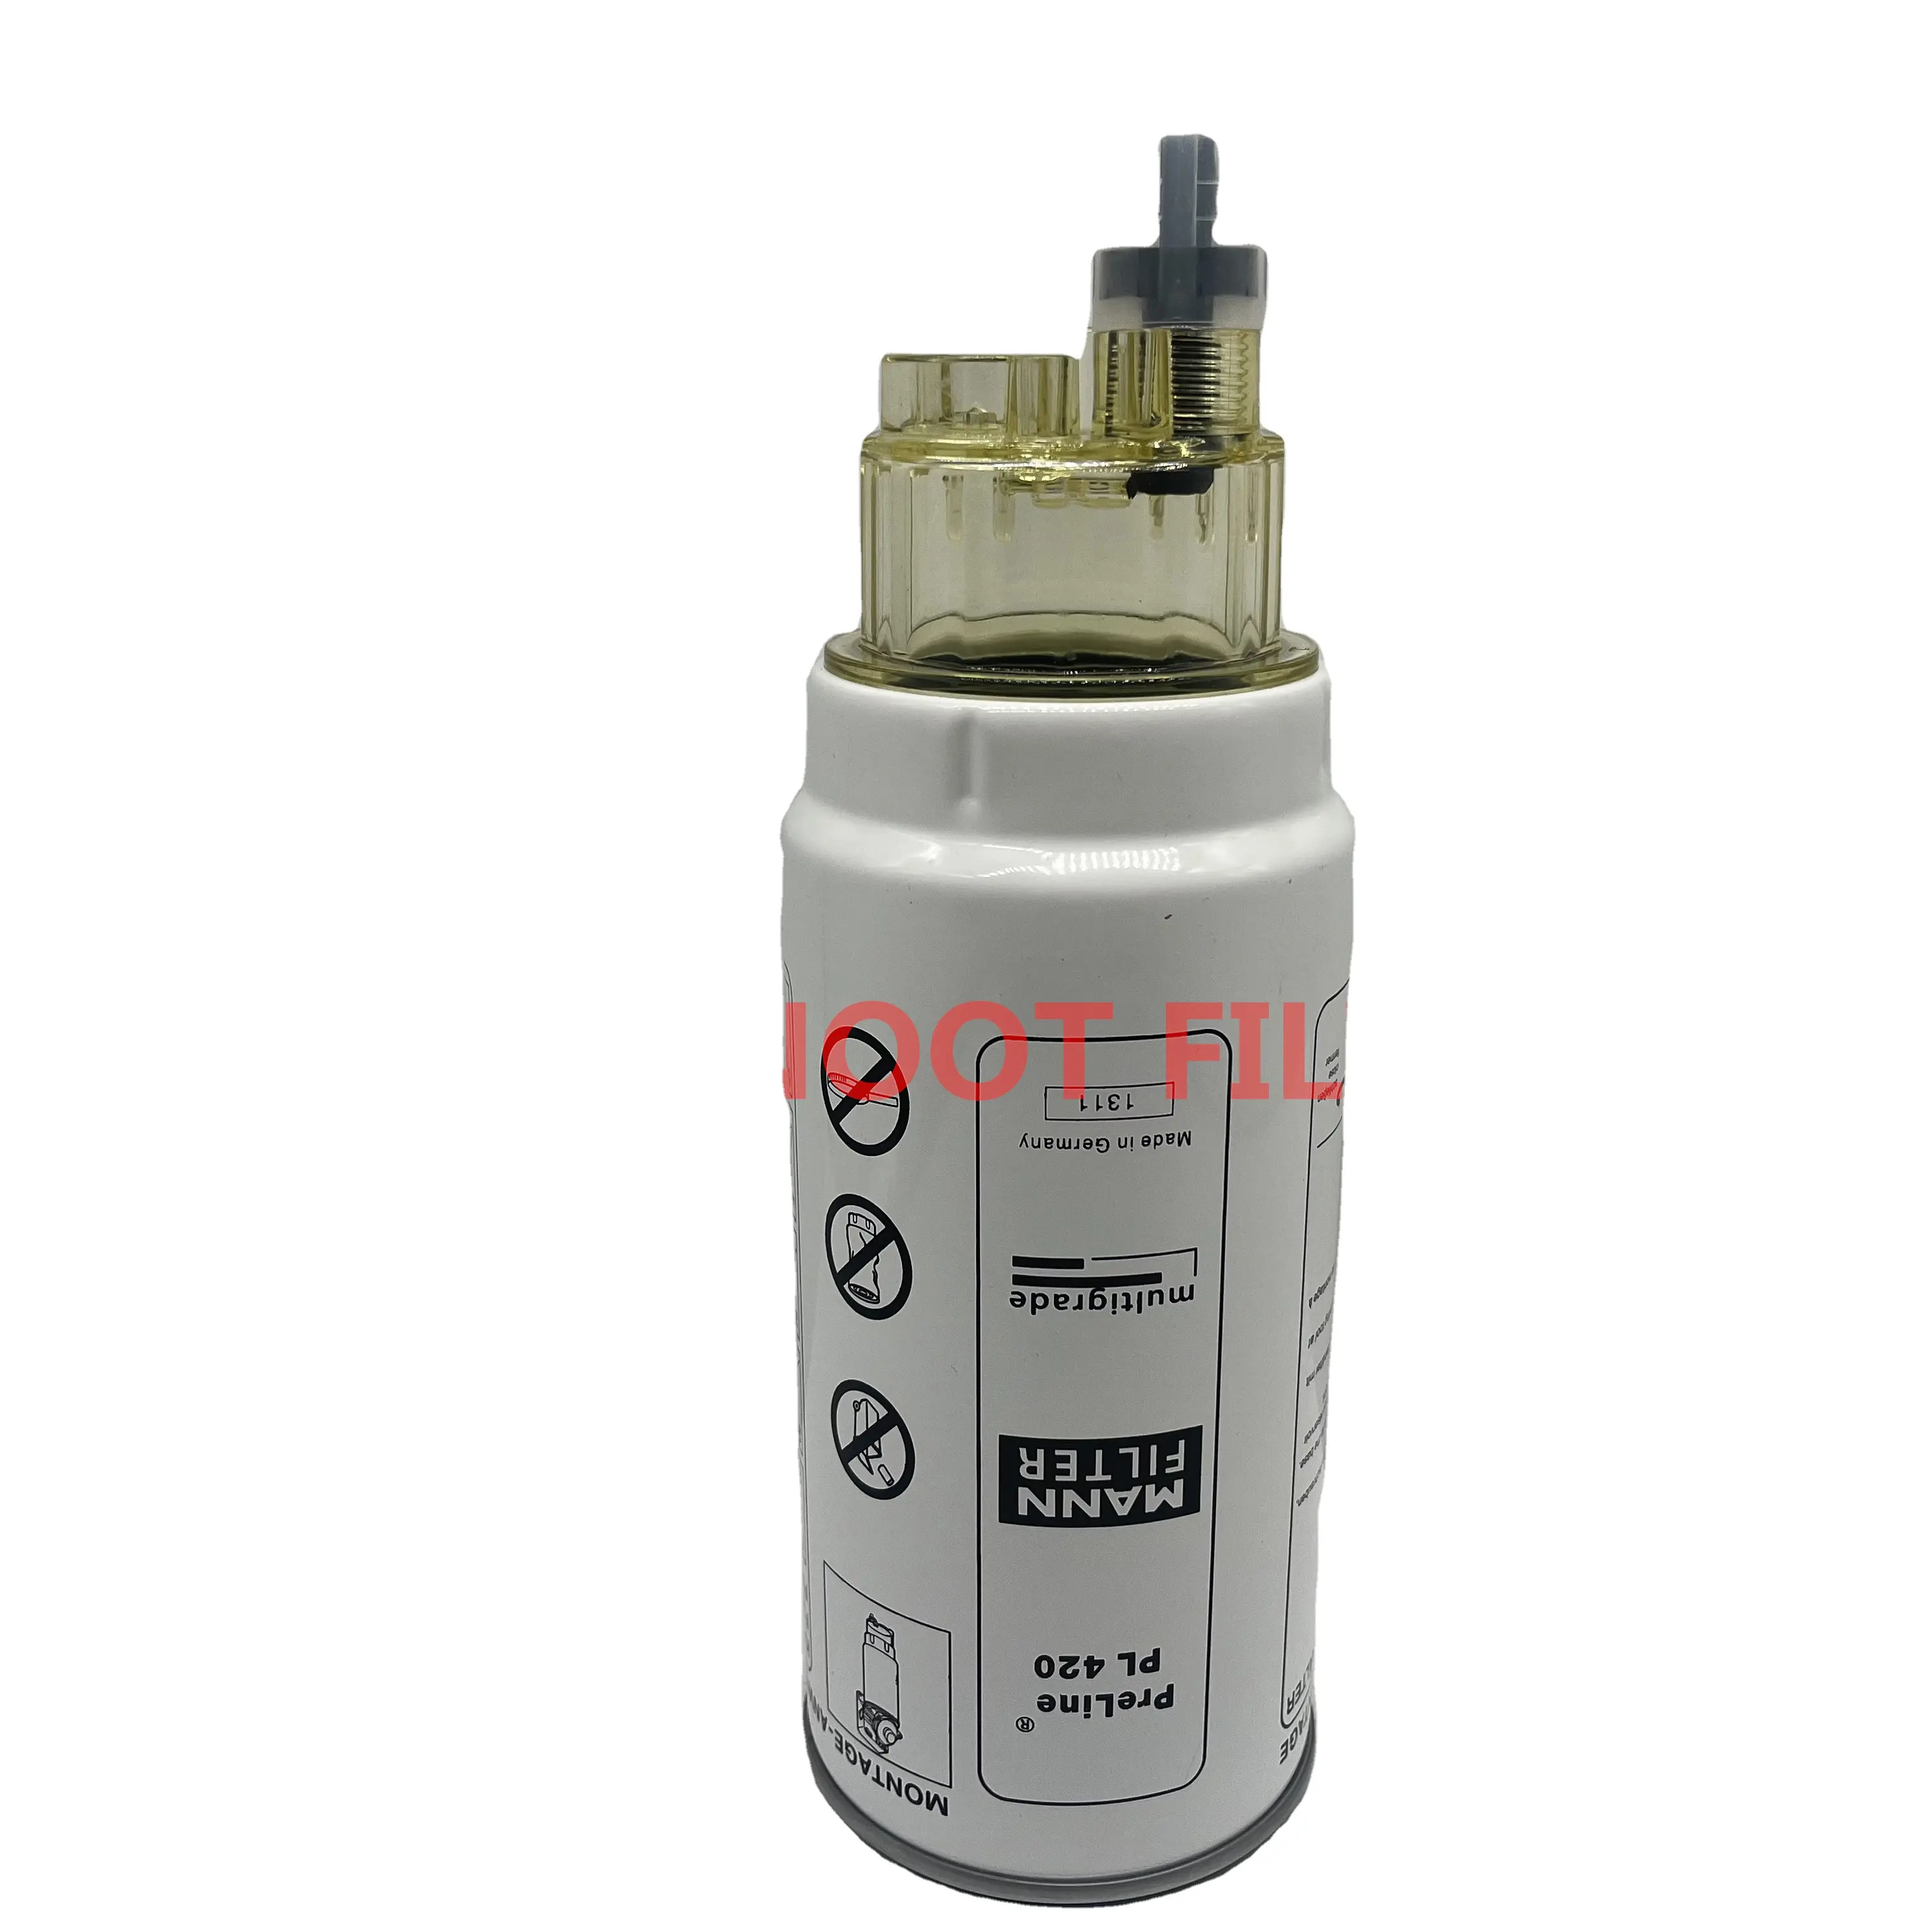 Fuel filter PL420 is applicable to DAF truck engine fuel filter